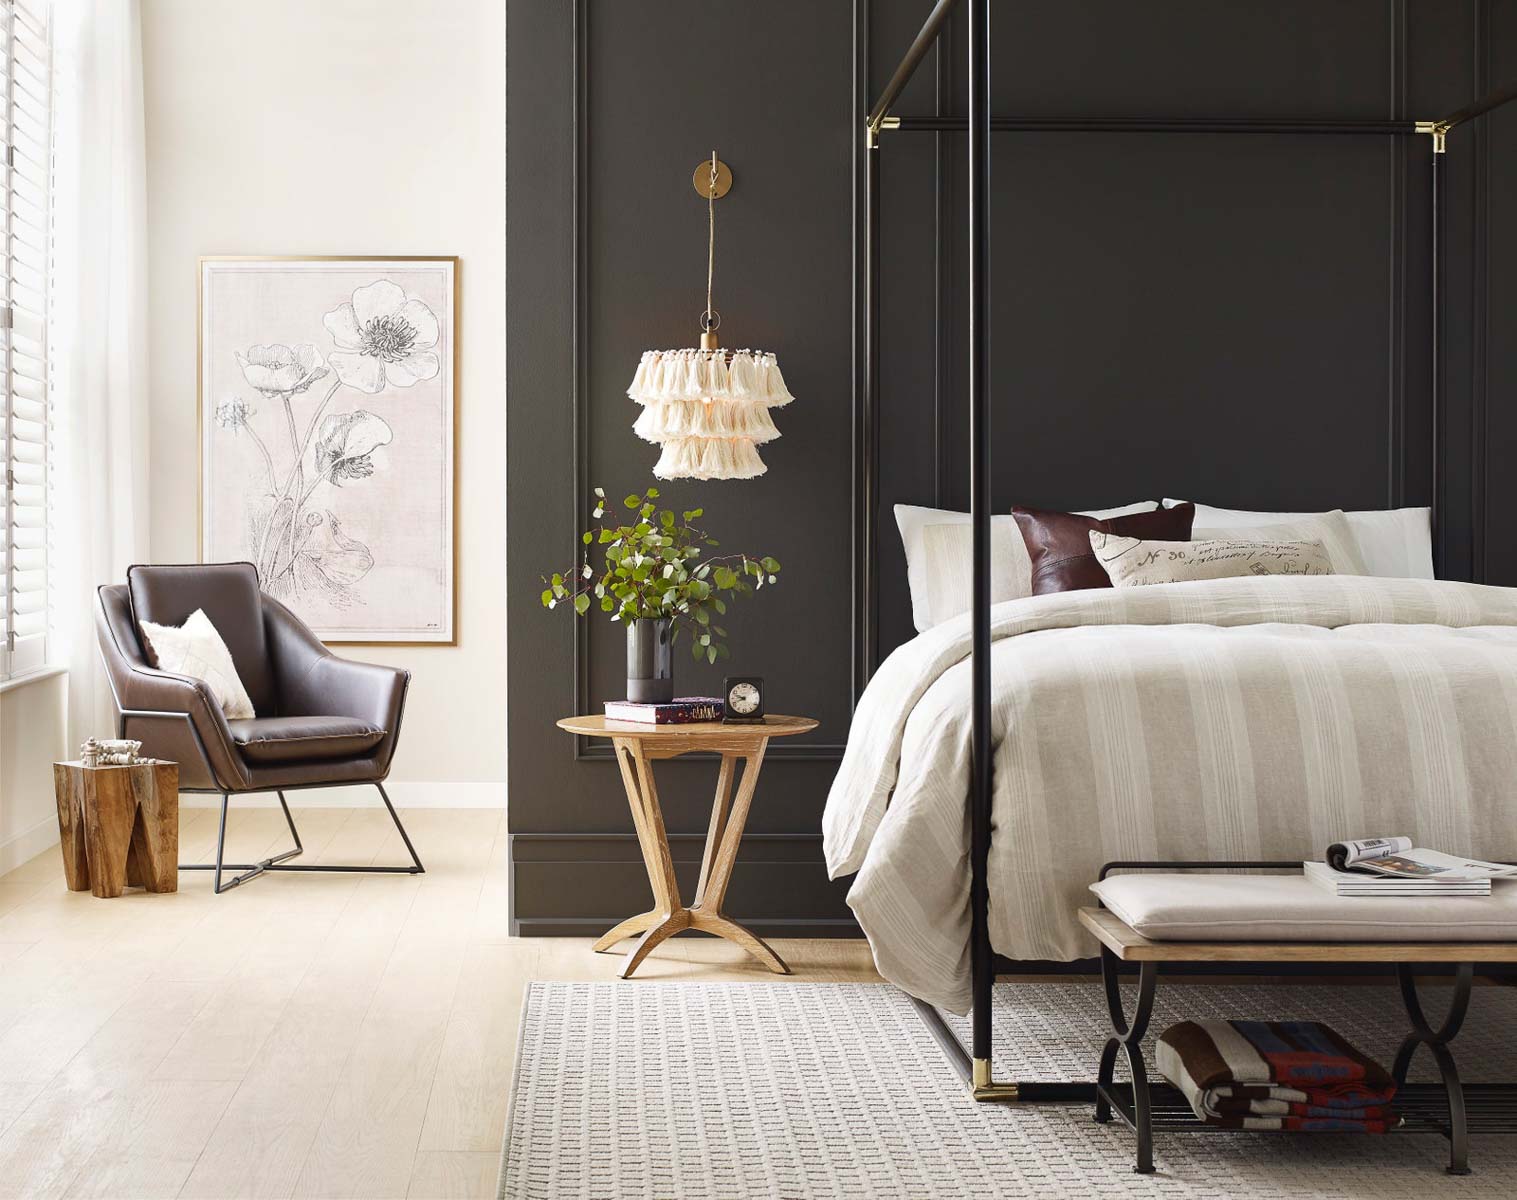 Sherwin Williams Color of the Year - dark, saturated colors are a 2021 design trend!